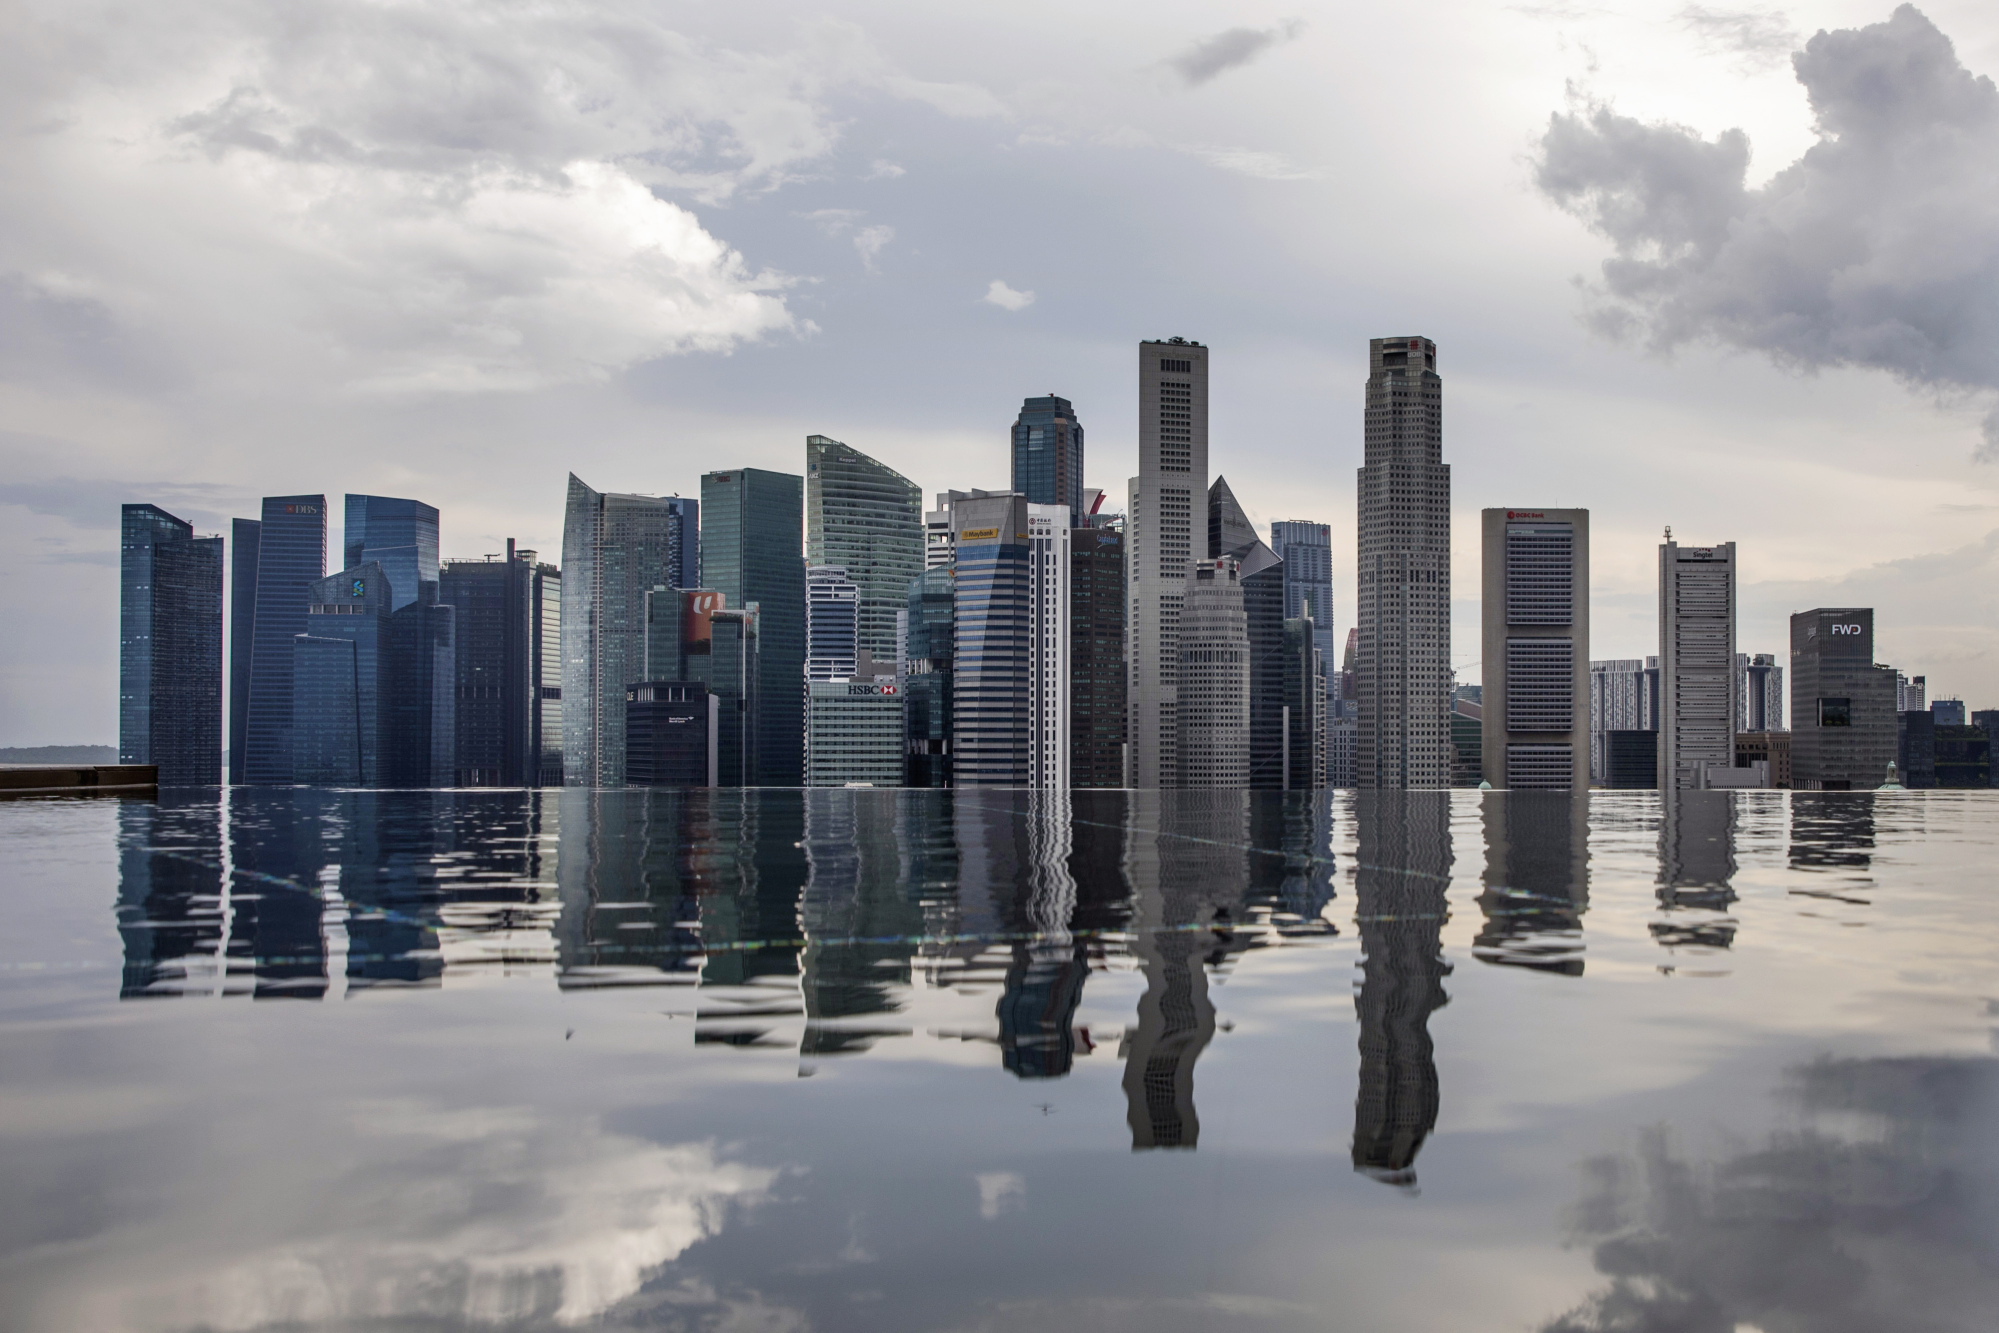 Commercial buildings standing in the central business district are reflected in a rooftop pool in Singapore, on Wednesday, June 13, 2018. 
Photographer: Brent Lewin/Bloomberg